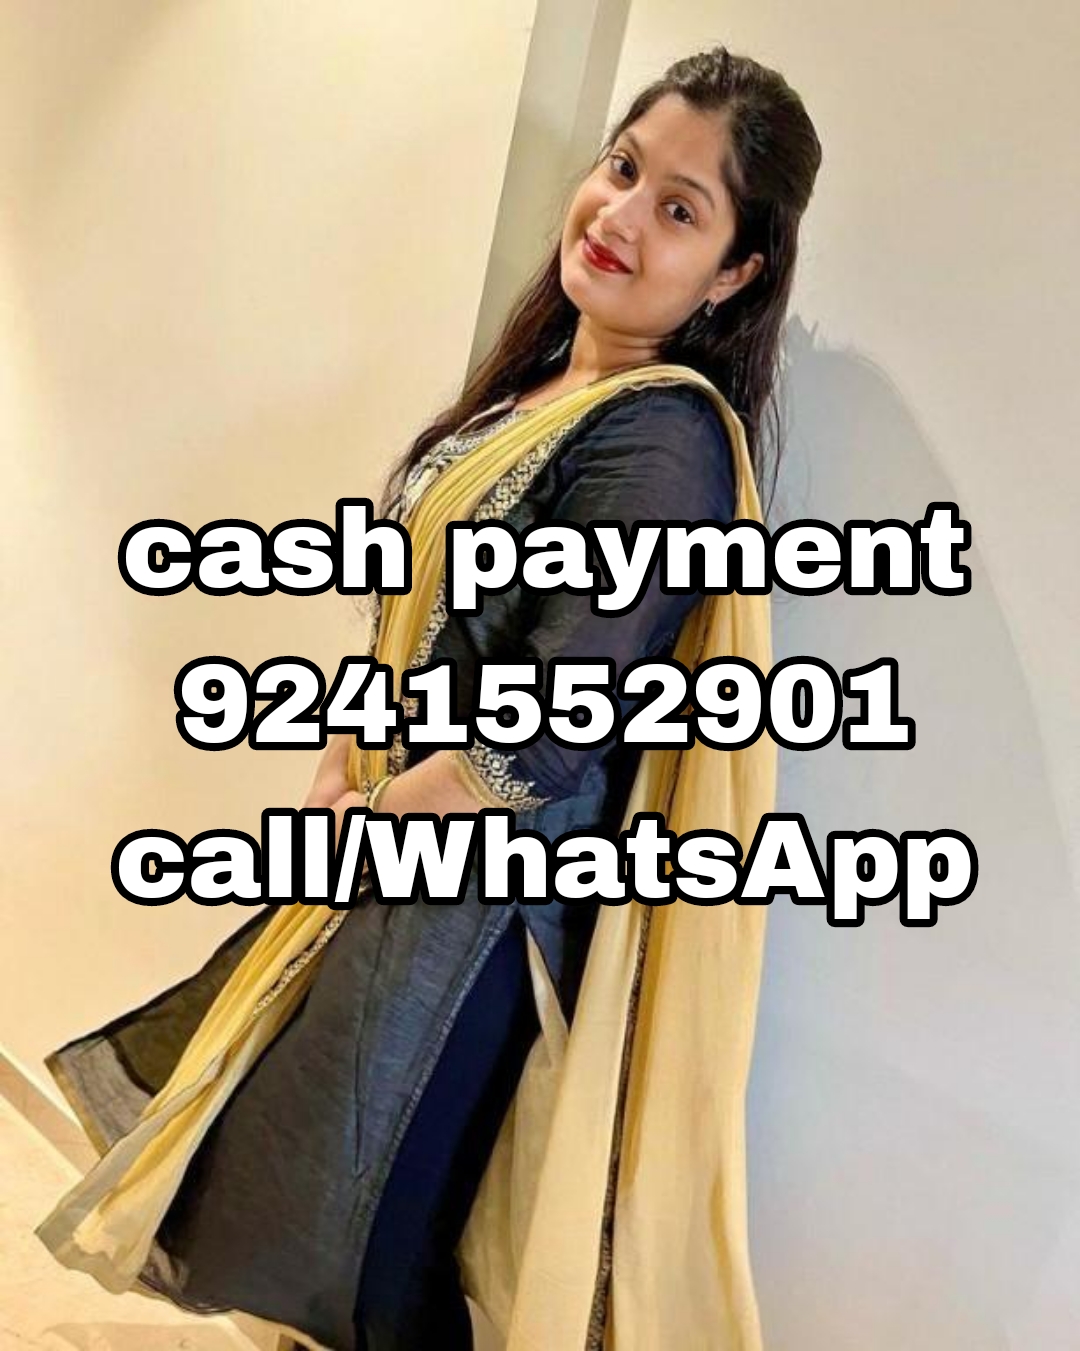 PALANPUR IN BEST SERVICE LOW PRICE FULL TRUSTED GENUINE SERVICE AVAILA